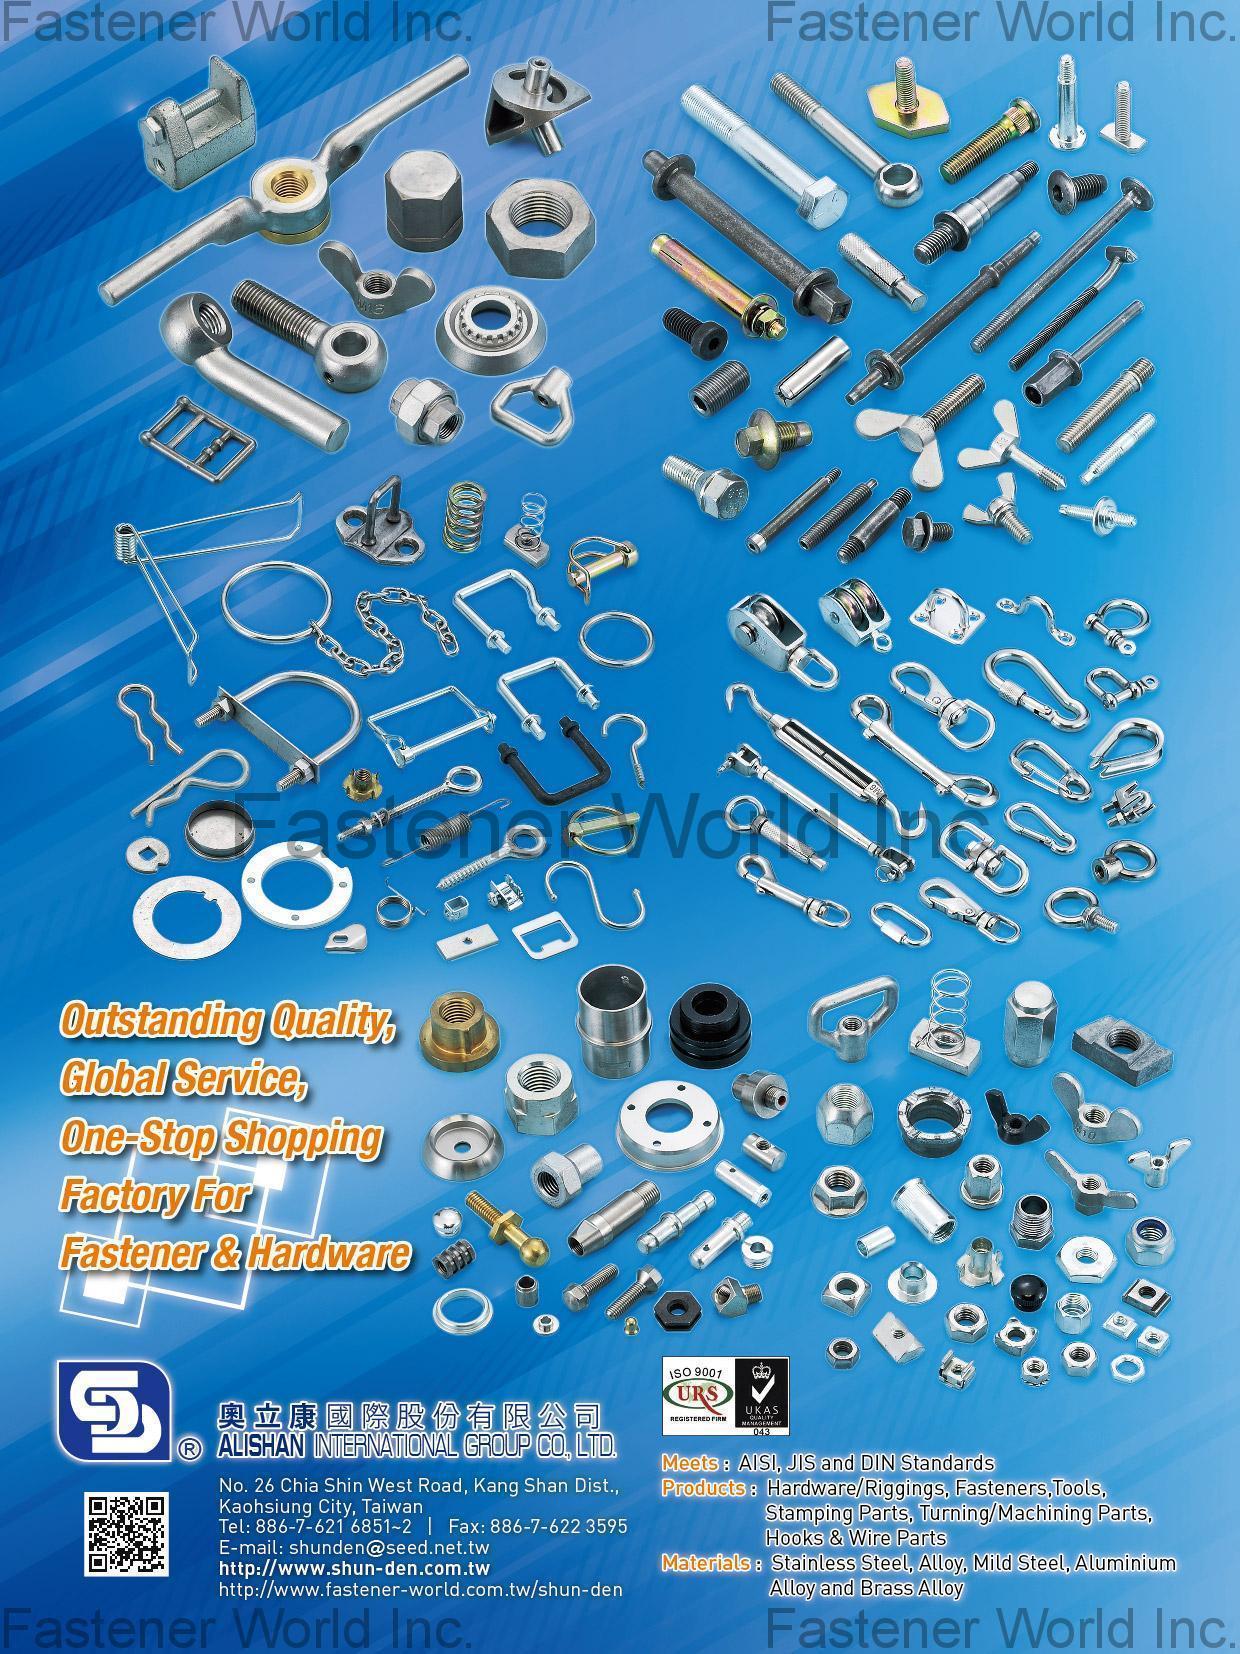 ALISHAN INTERNATIONAL GROUP CO., LTD. , Fastener tools, Bolts & Screws, Nuts, Link Chains & Steel Wire Rope products, Turning & Cutting parts, Stamping parts, Hardware & Rigging, Casting & Forging parts, Wrought (Forged)-Products , Turning Parts